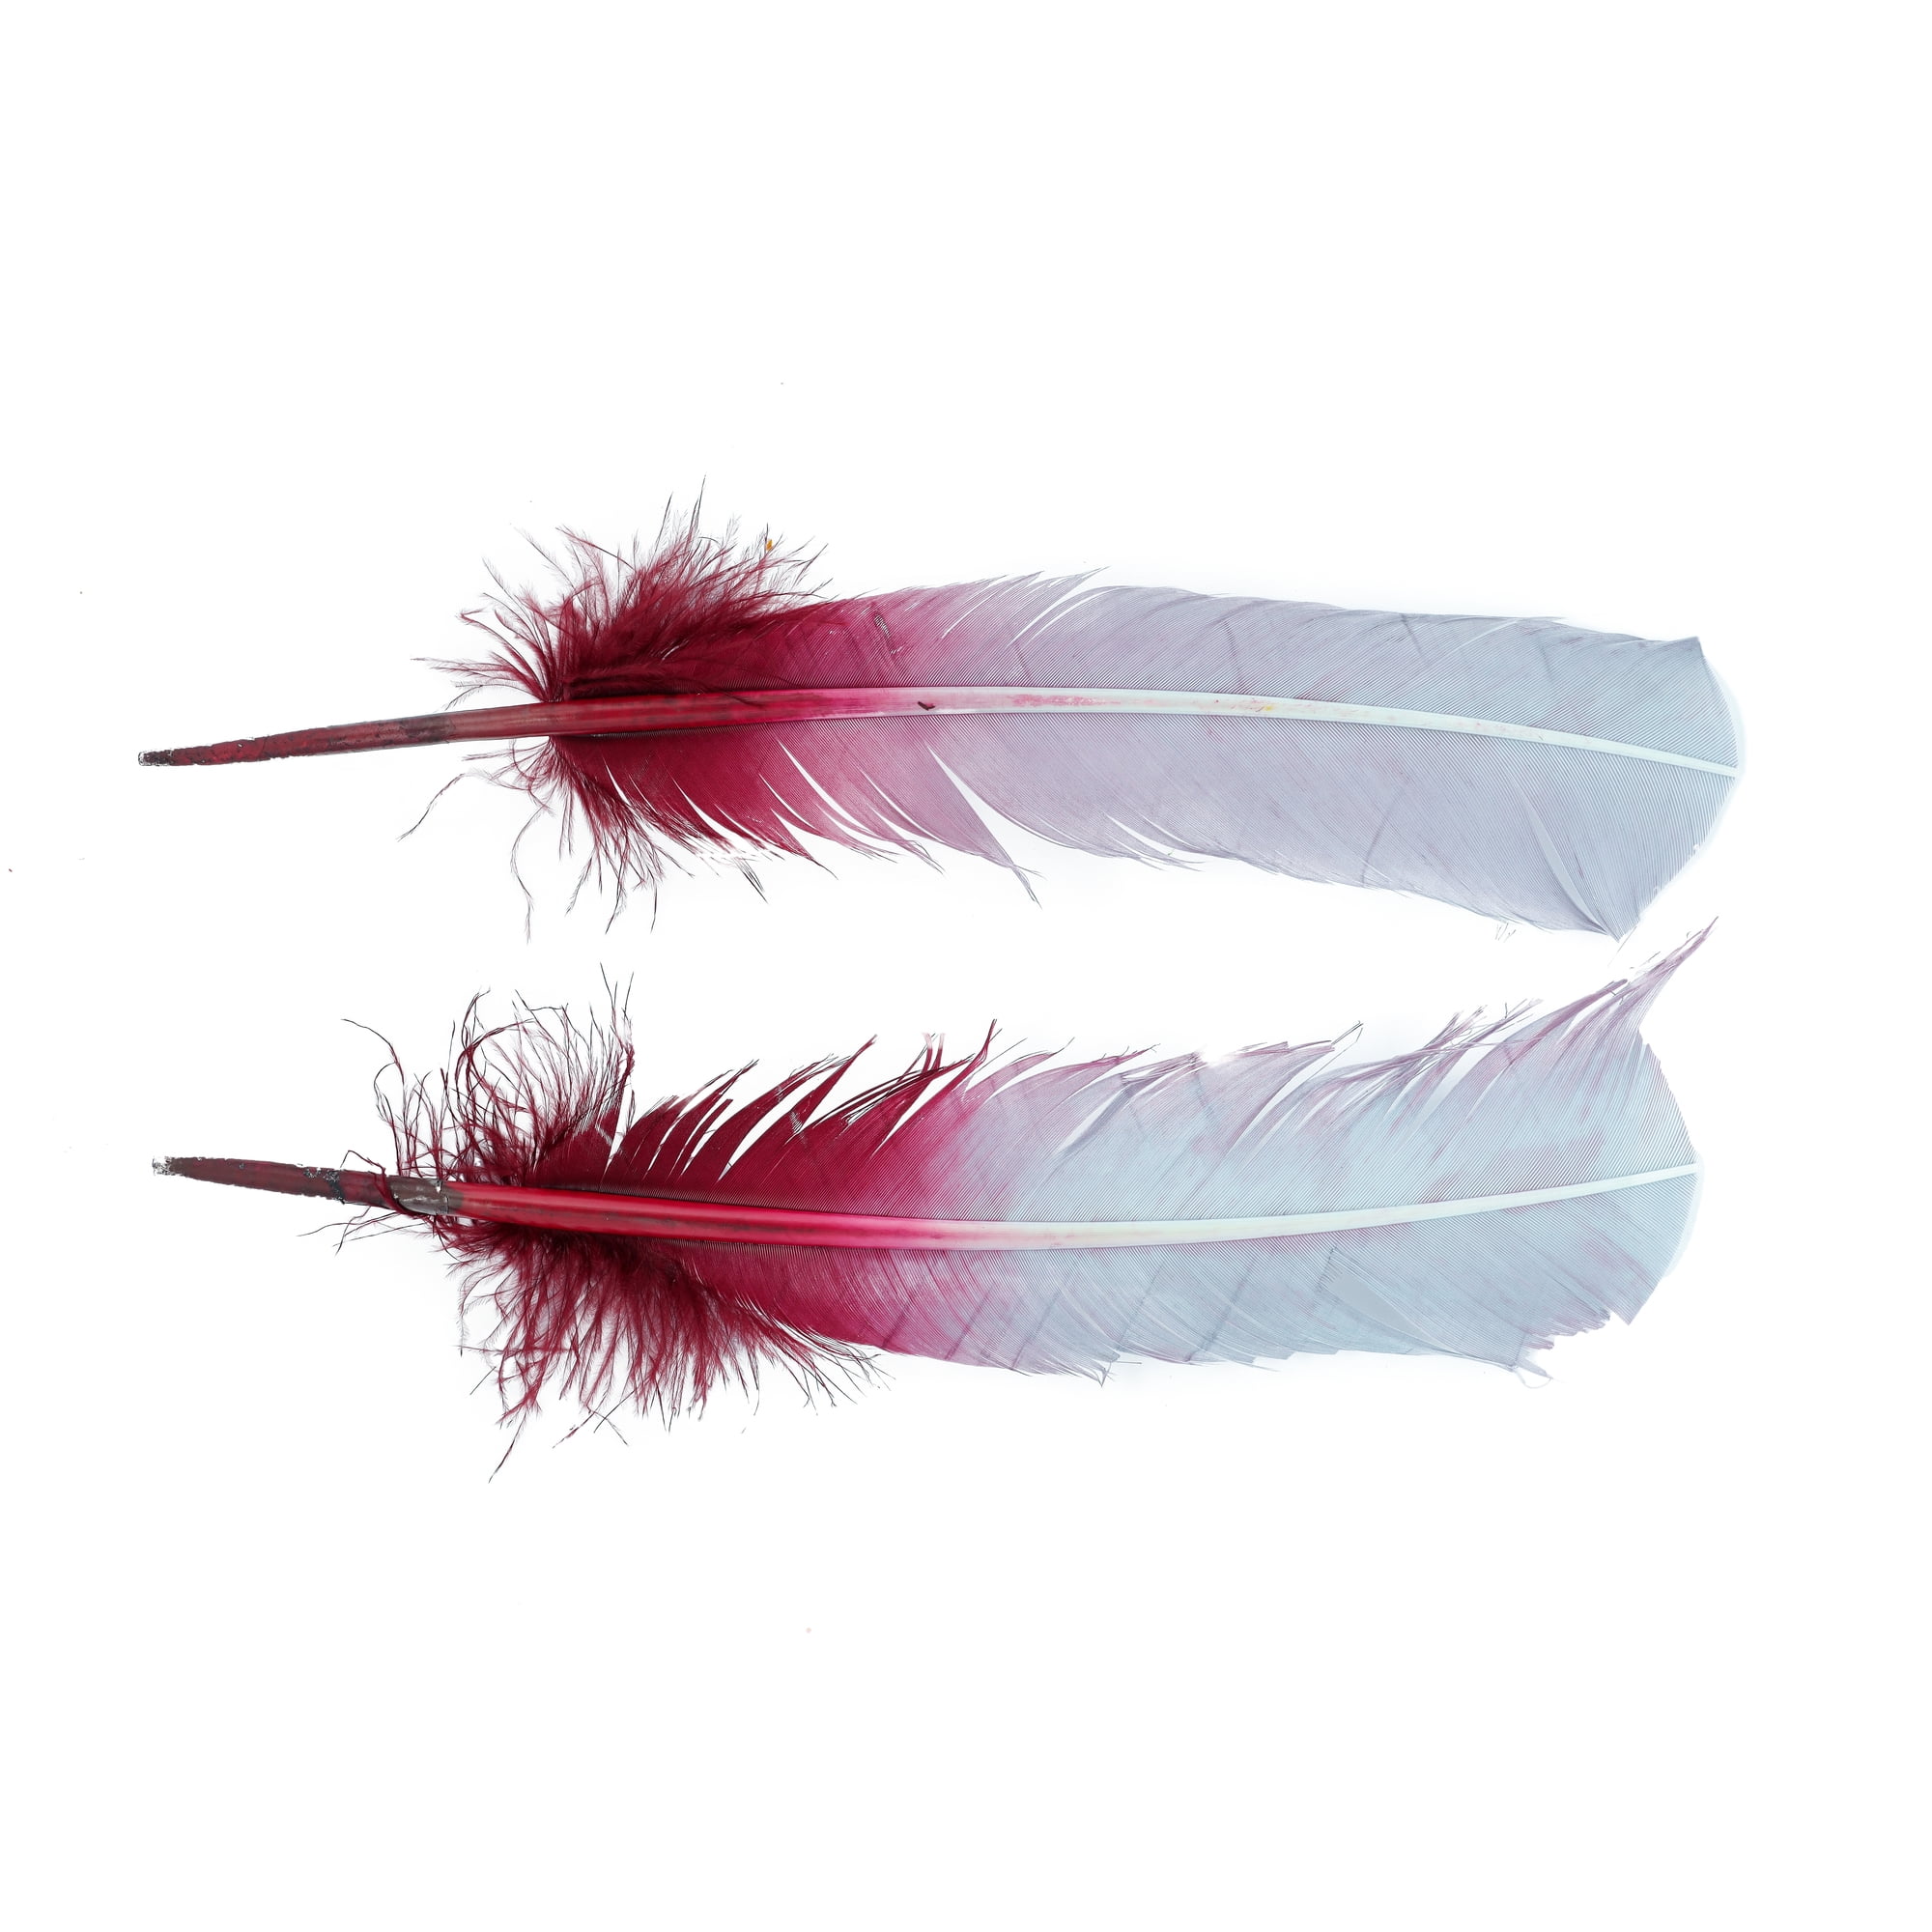 Zucker - Turkey Quills by Pound - Bulk Feathers for Crafting, Decoration,  Home Décor, Holiday Decorating, Weddings and Events, Cosplay, Costumes 